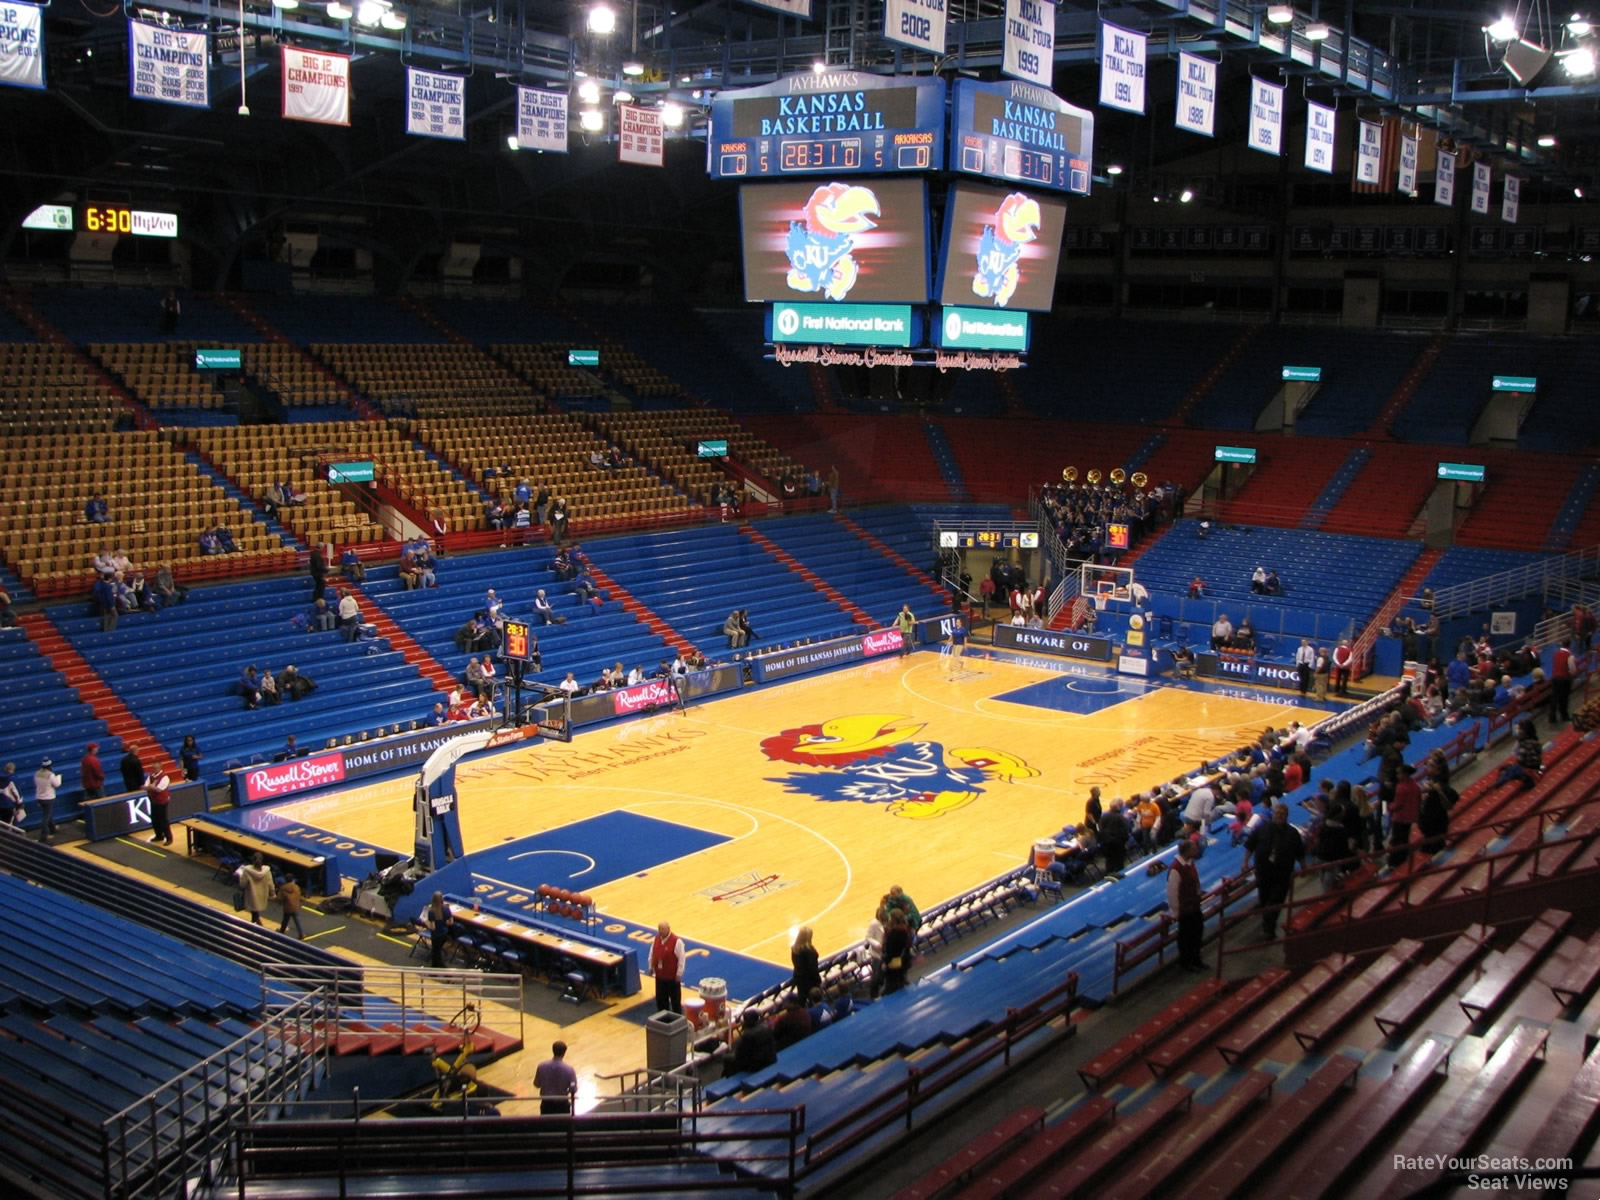 section 21, row 18 seat view  - allen fieldhouse